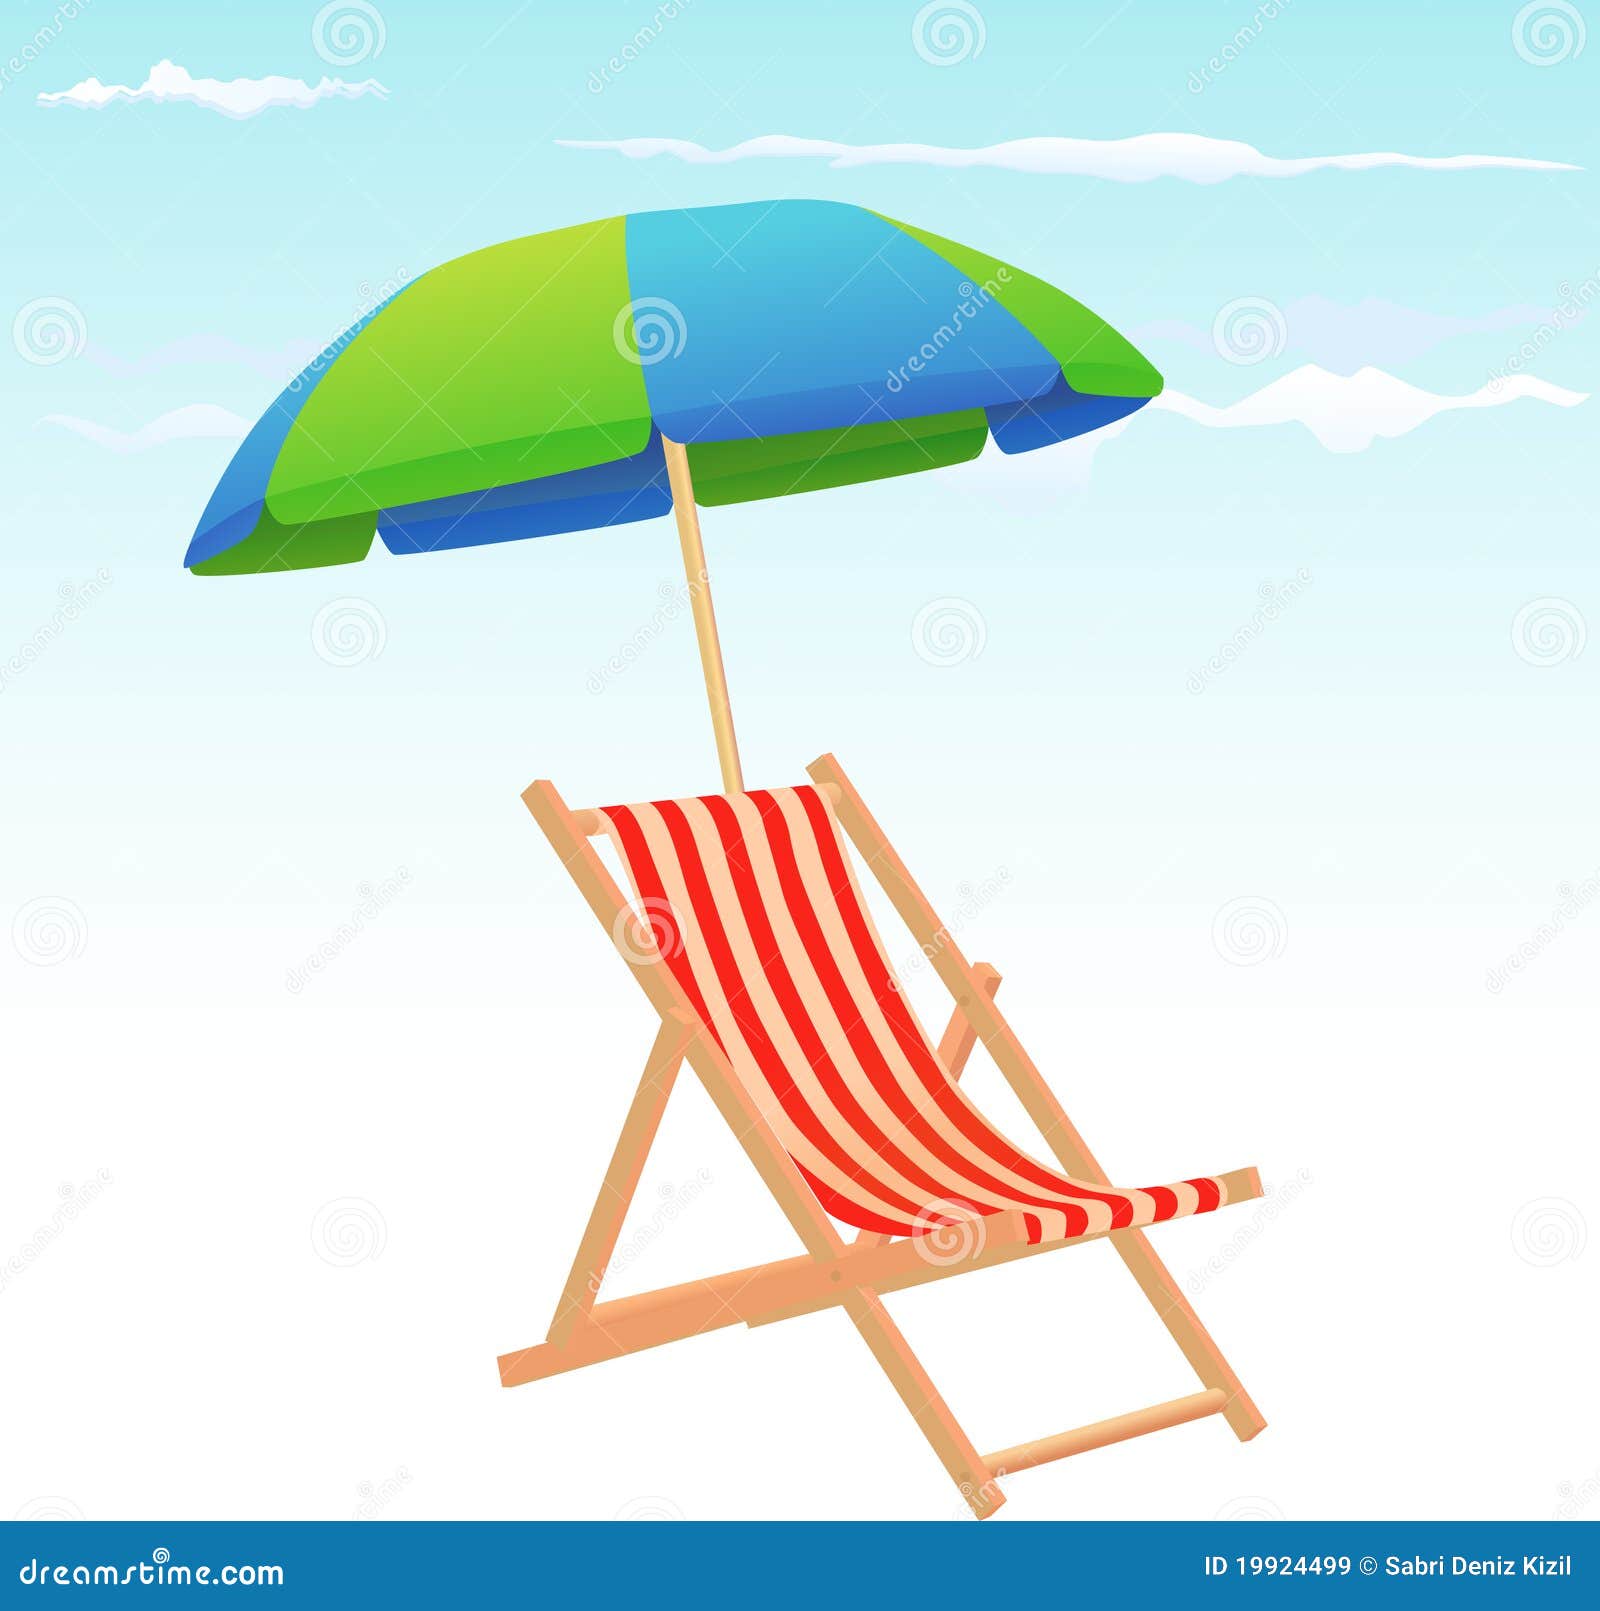 Beach Chairs And Umbrella Royalty Free Stock Images Image 19924499